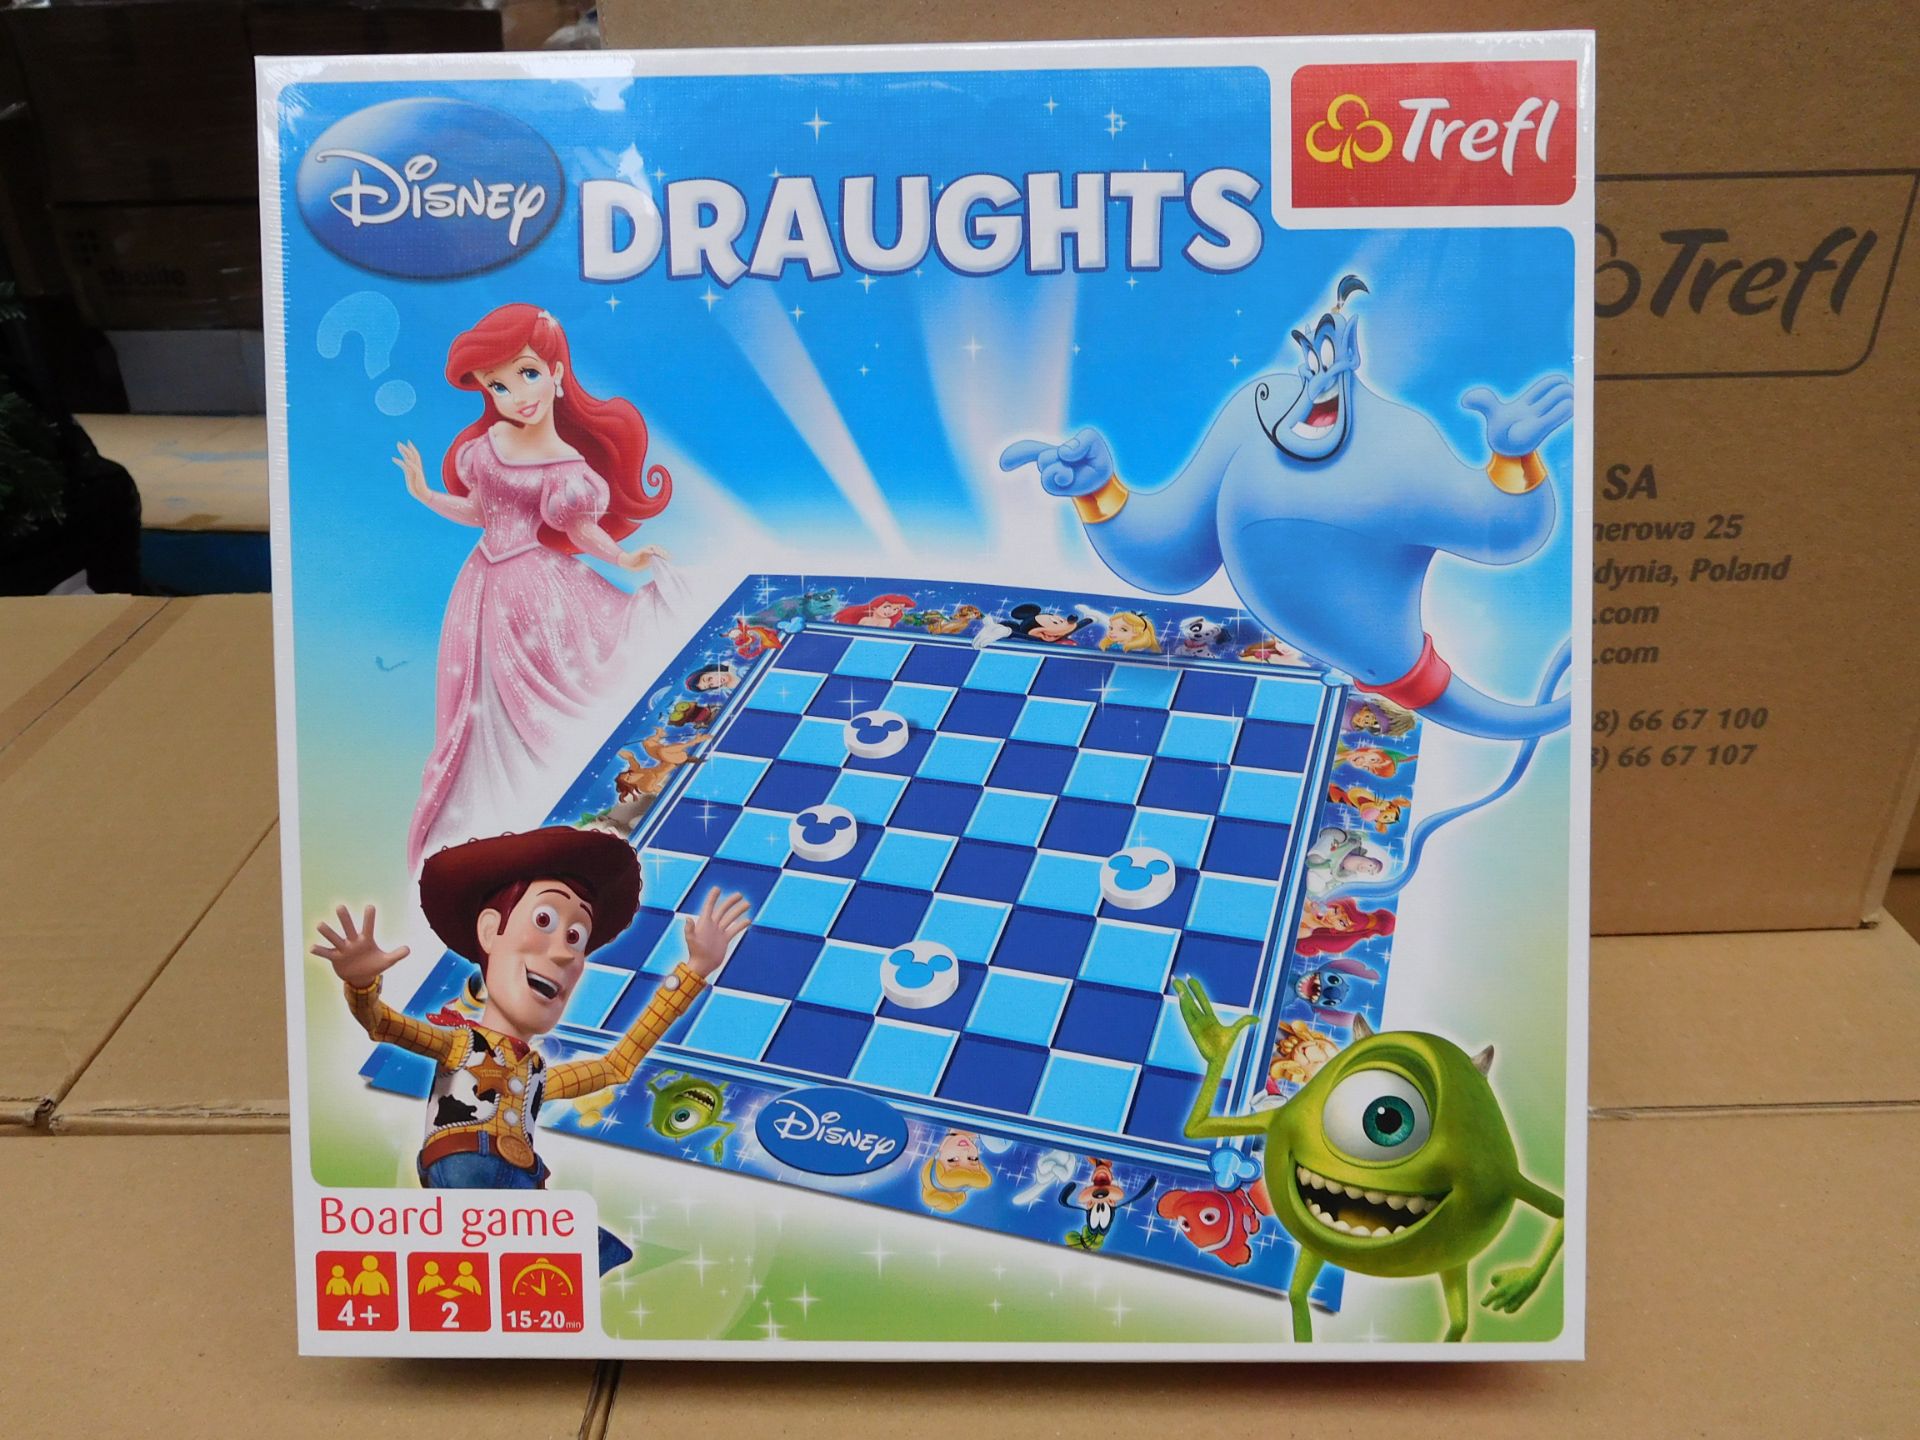 12 x Trefl DISNEY DRAUGHTS BOARD GAMES. FOR AGES 4+. 2 PLAYERS. BRAND NEW STOCK. ORIGINAL RRP £24.99